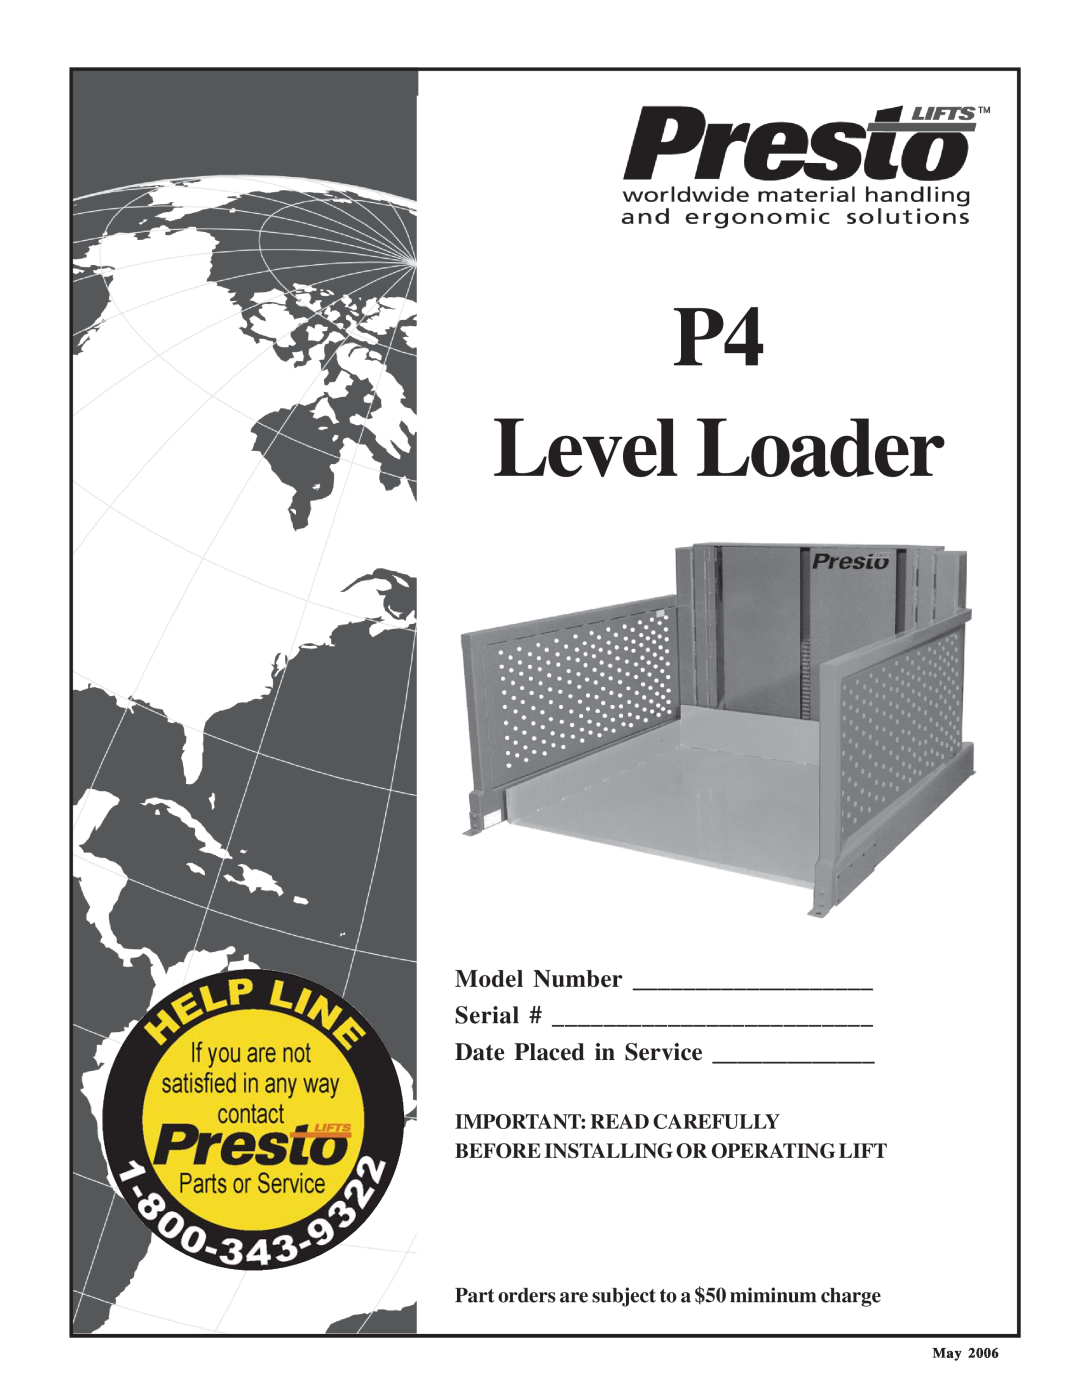 Presto manual Model Number, Serial #, Date Placed in Service _____________, Important Read Carefully, P4 Level Loader 